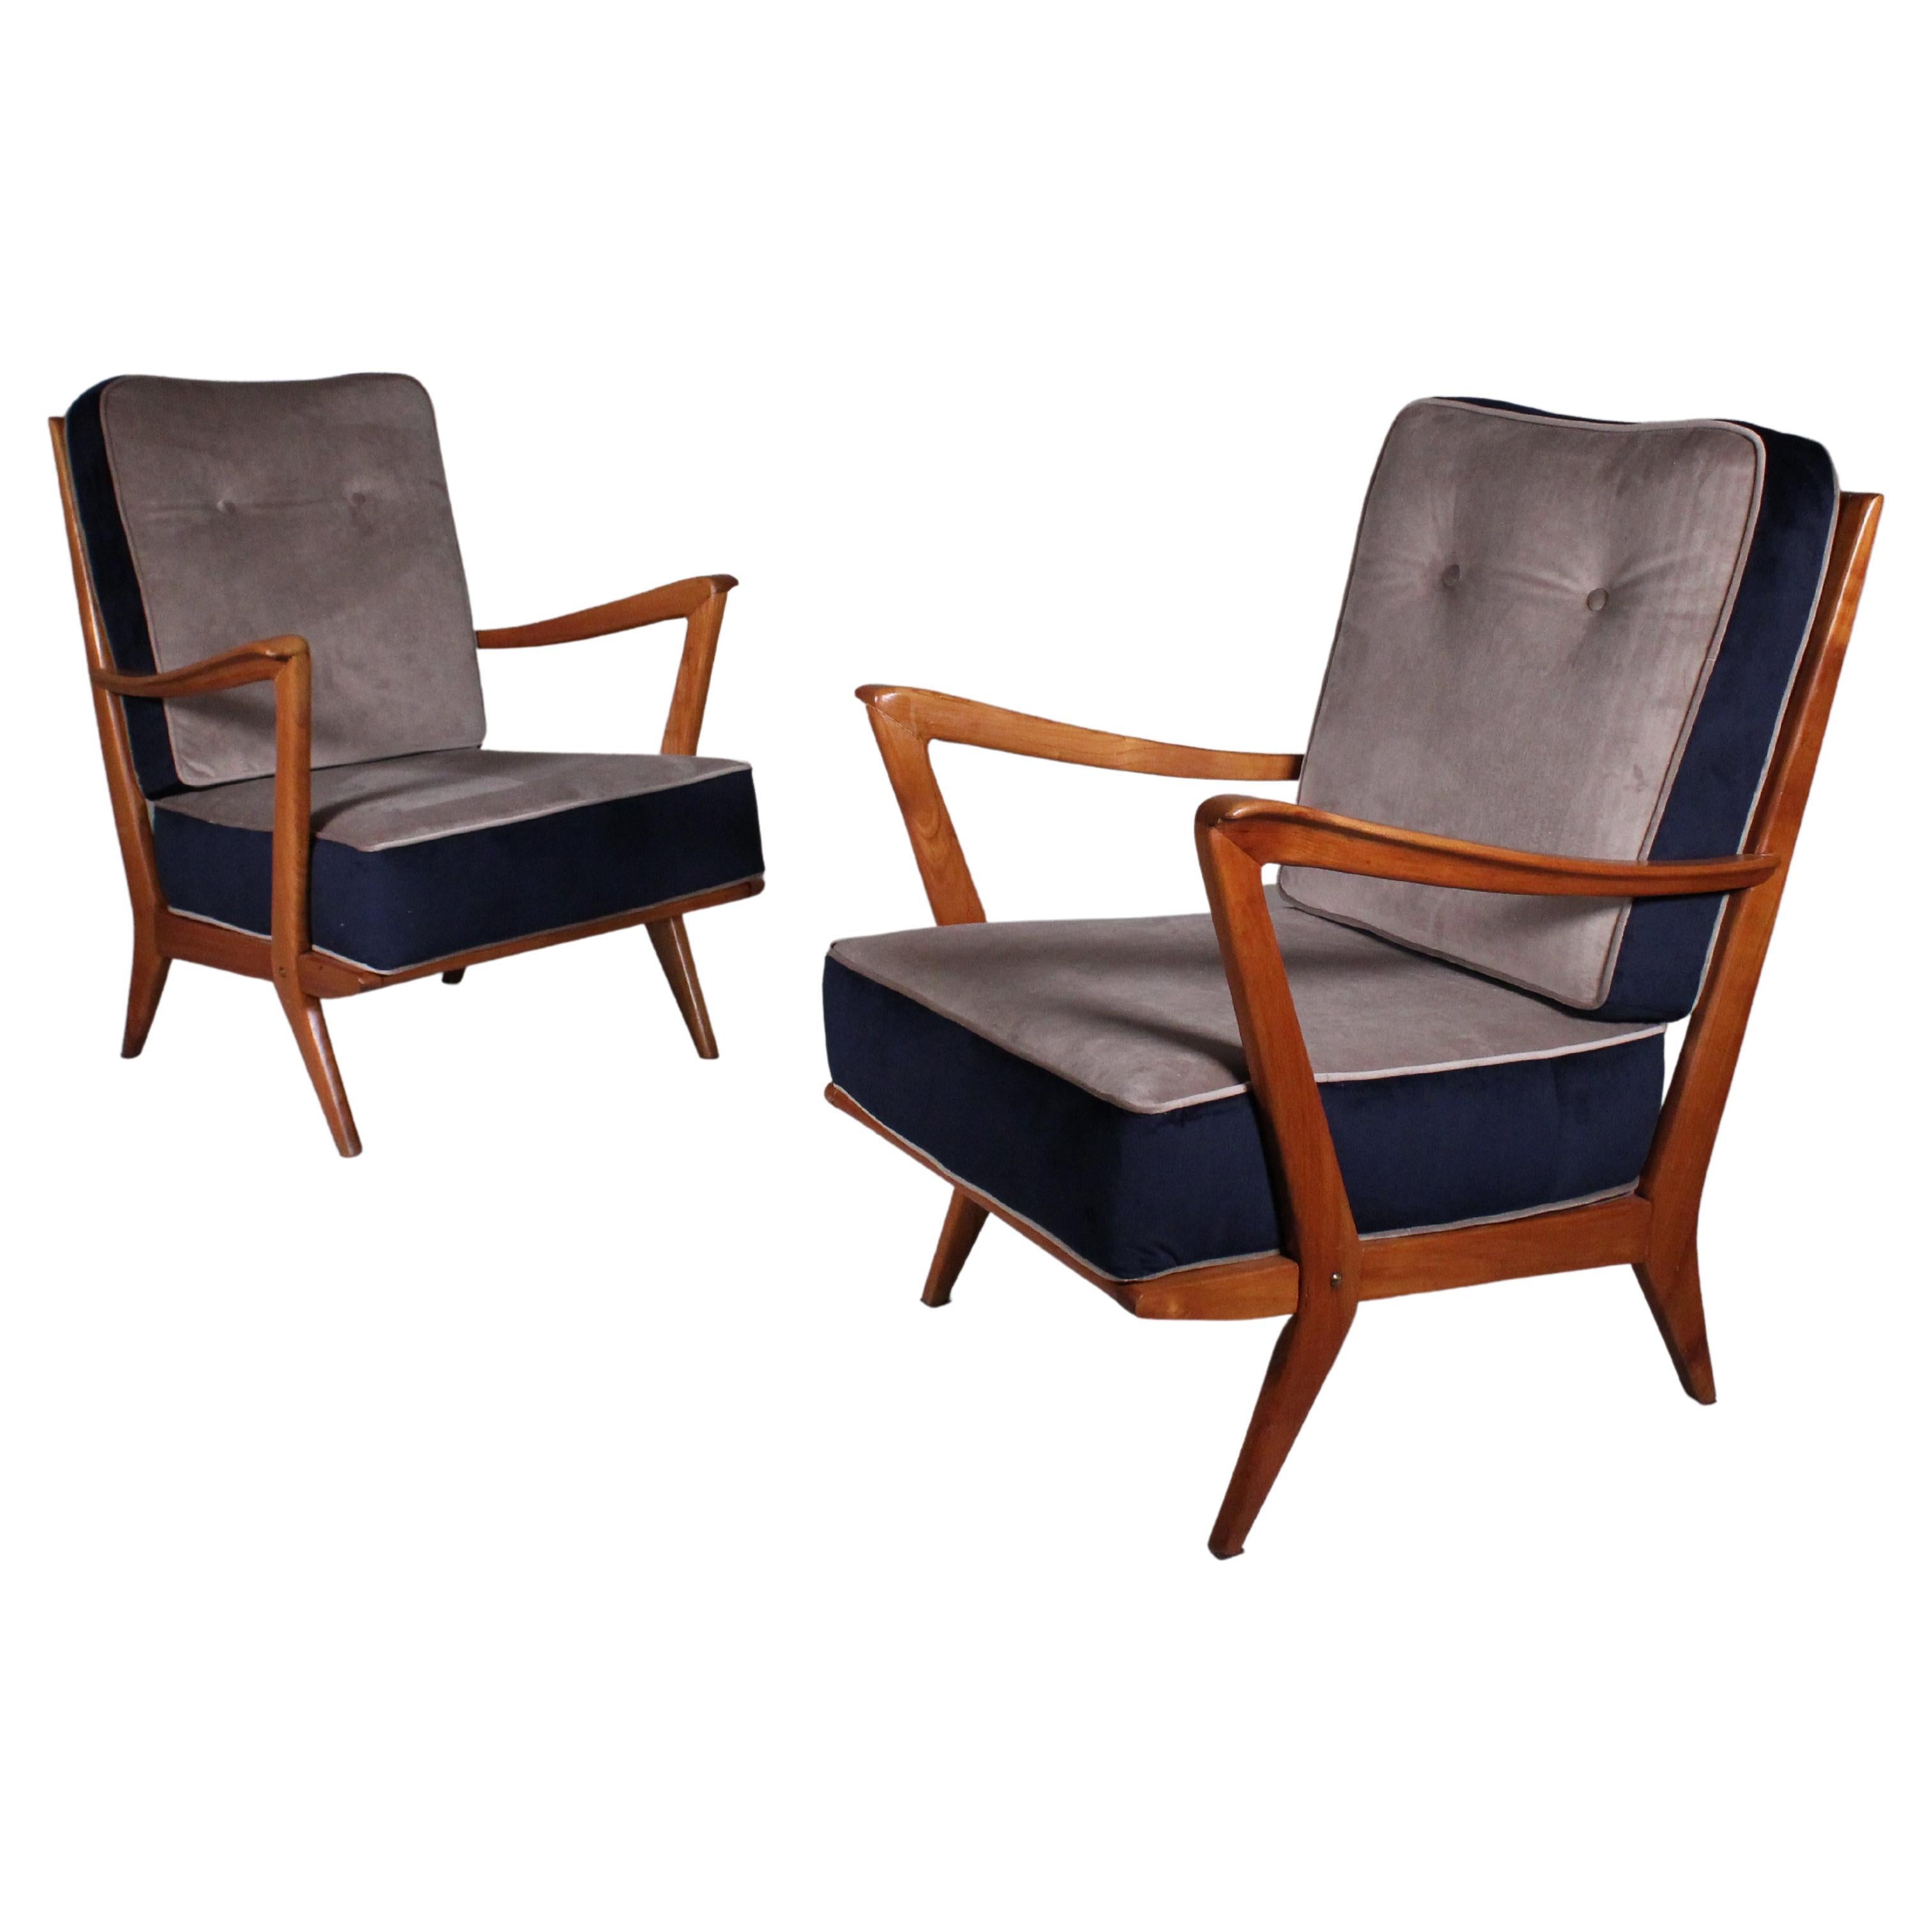 Gio Ponti for Cassina, pair of armchairs model 516, cherry wood, grey and blue velvet upholstery, Italy, 1955. Designed by Gio Ponti and produced by Cassina, this model speaks exactly to the design language of Gio Ponti in the 1950s. These chairs